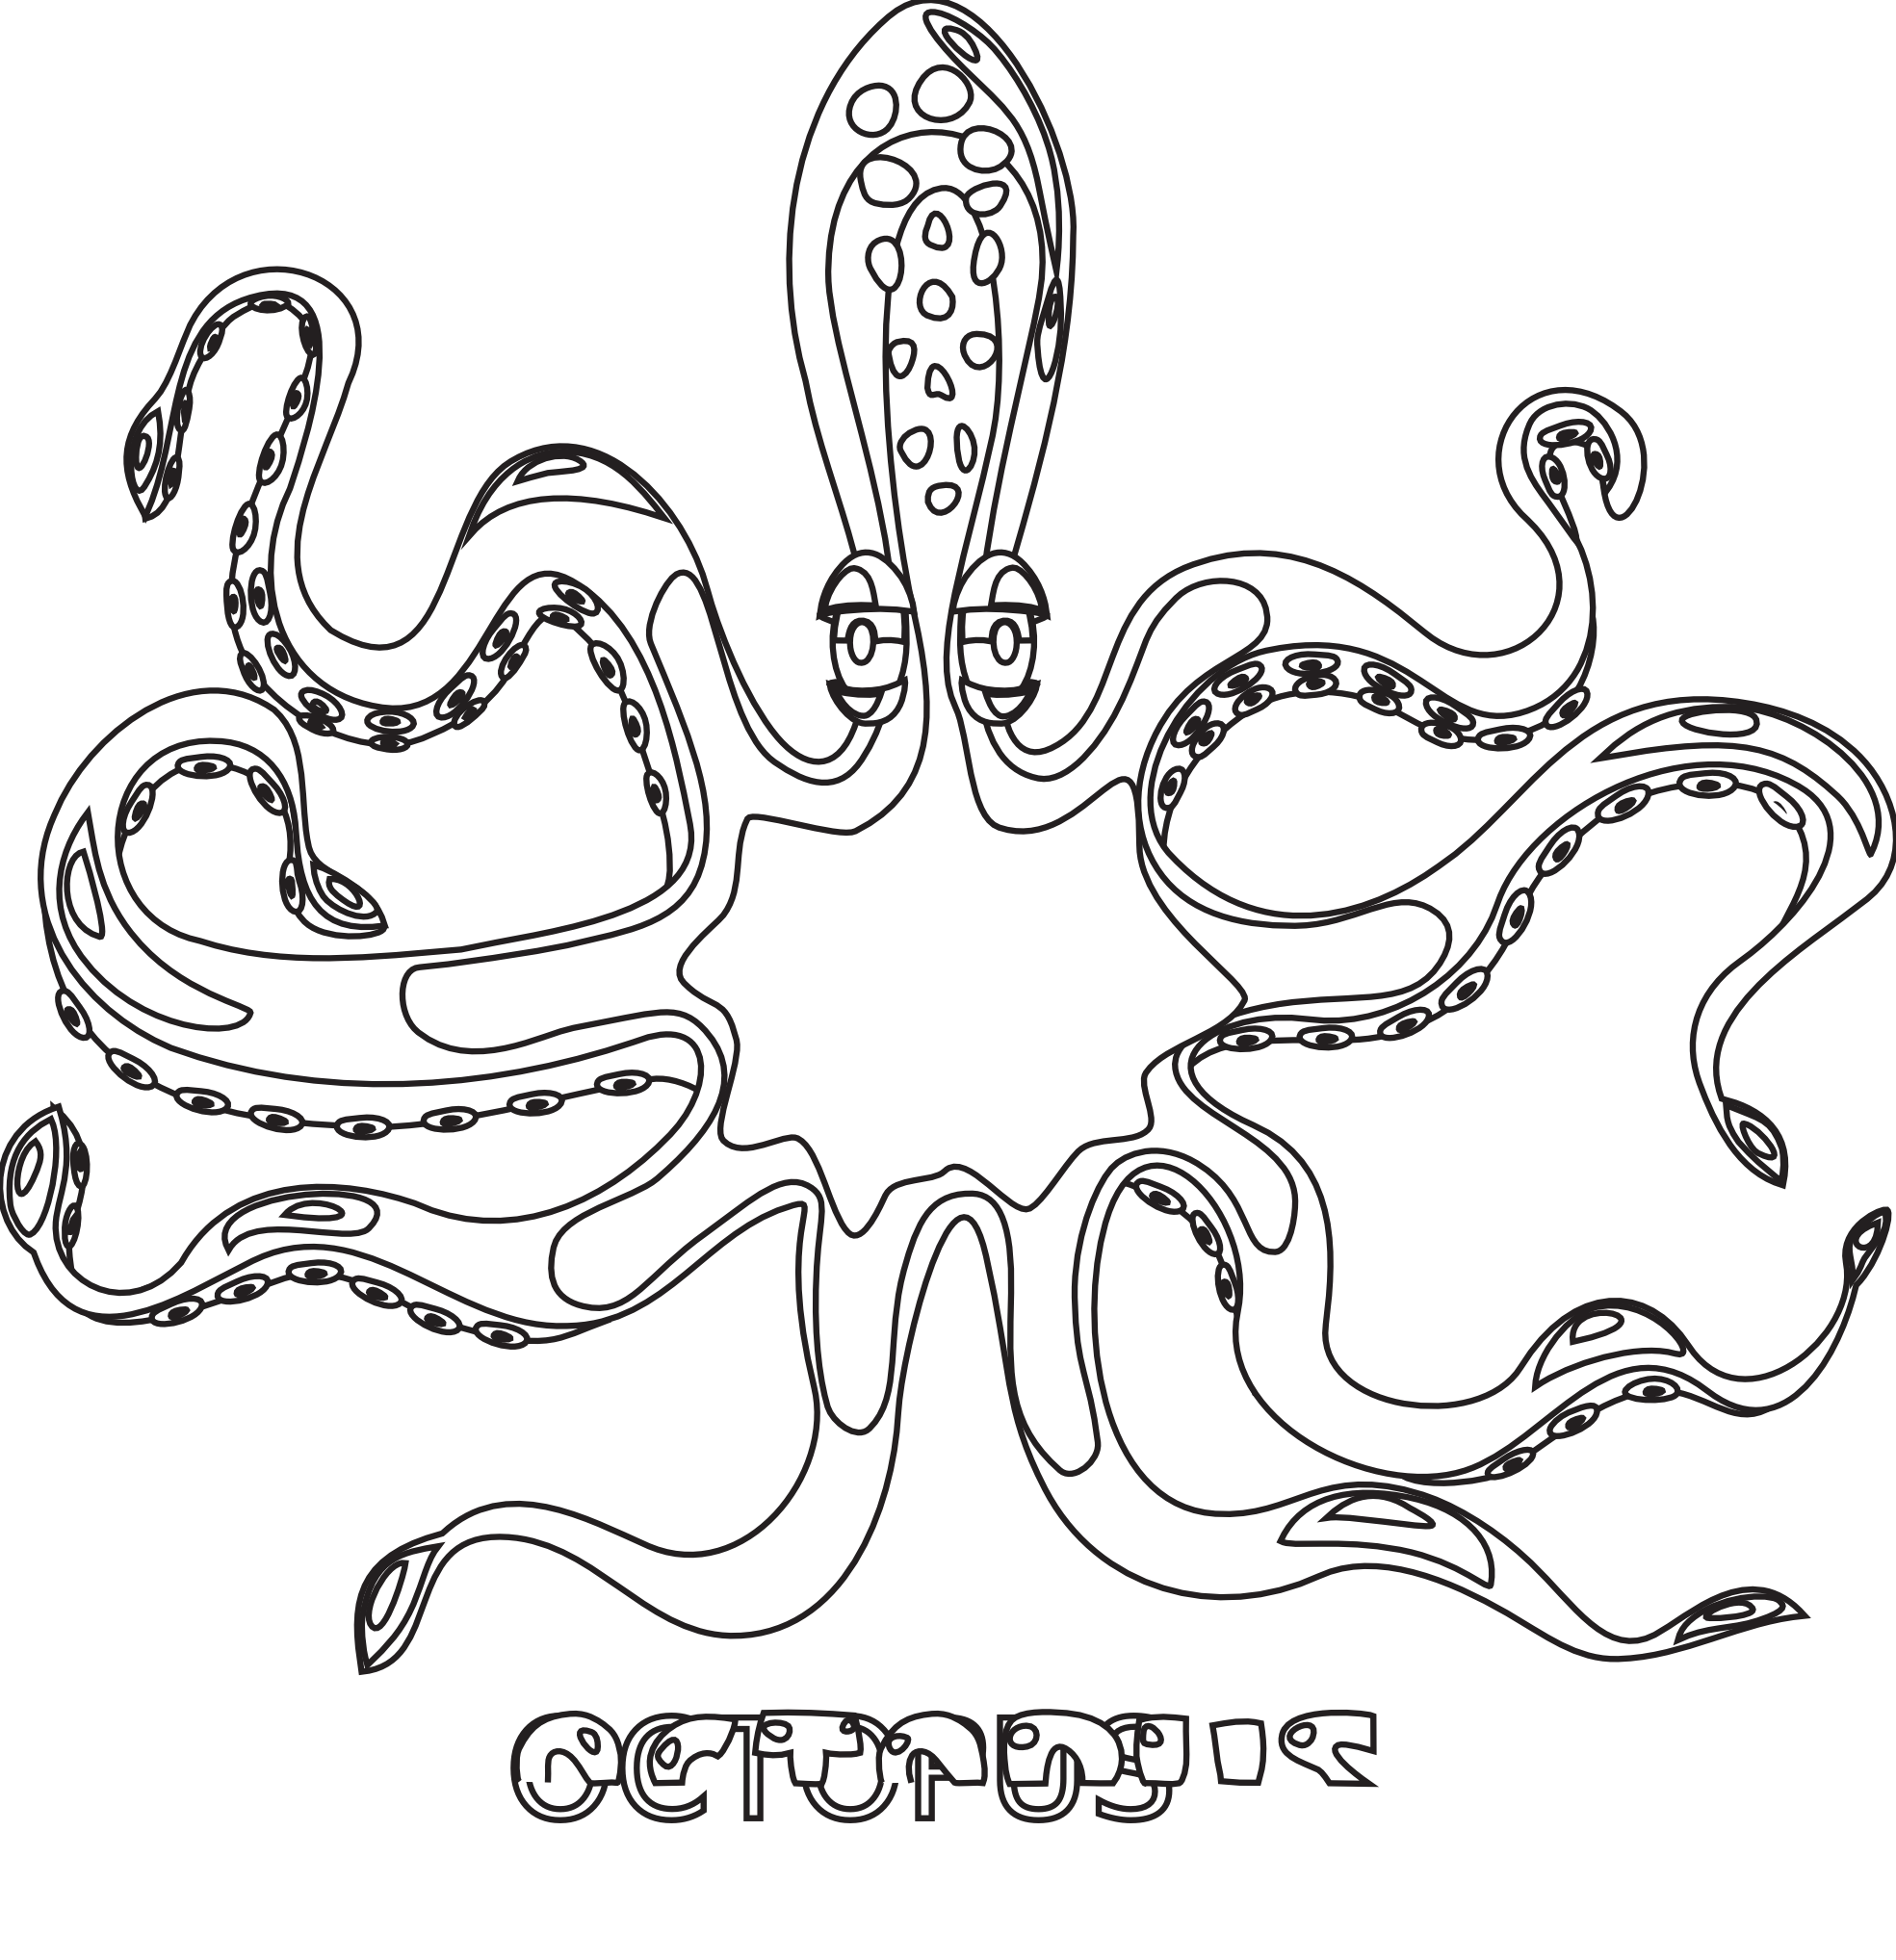 Octopus Black White Line Art Coloring Book Colouring Coloring Book